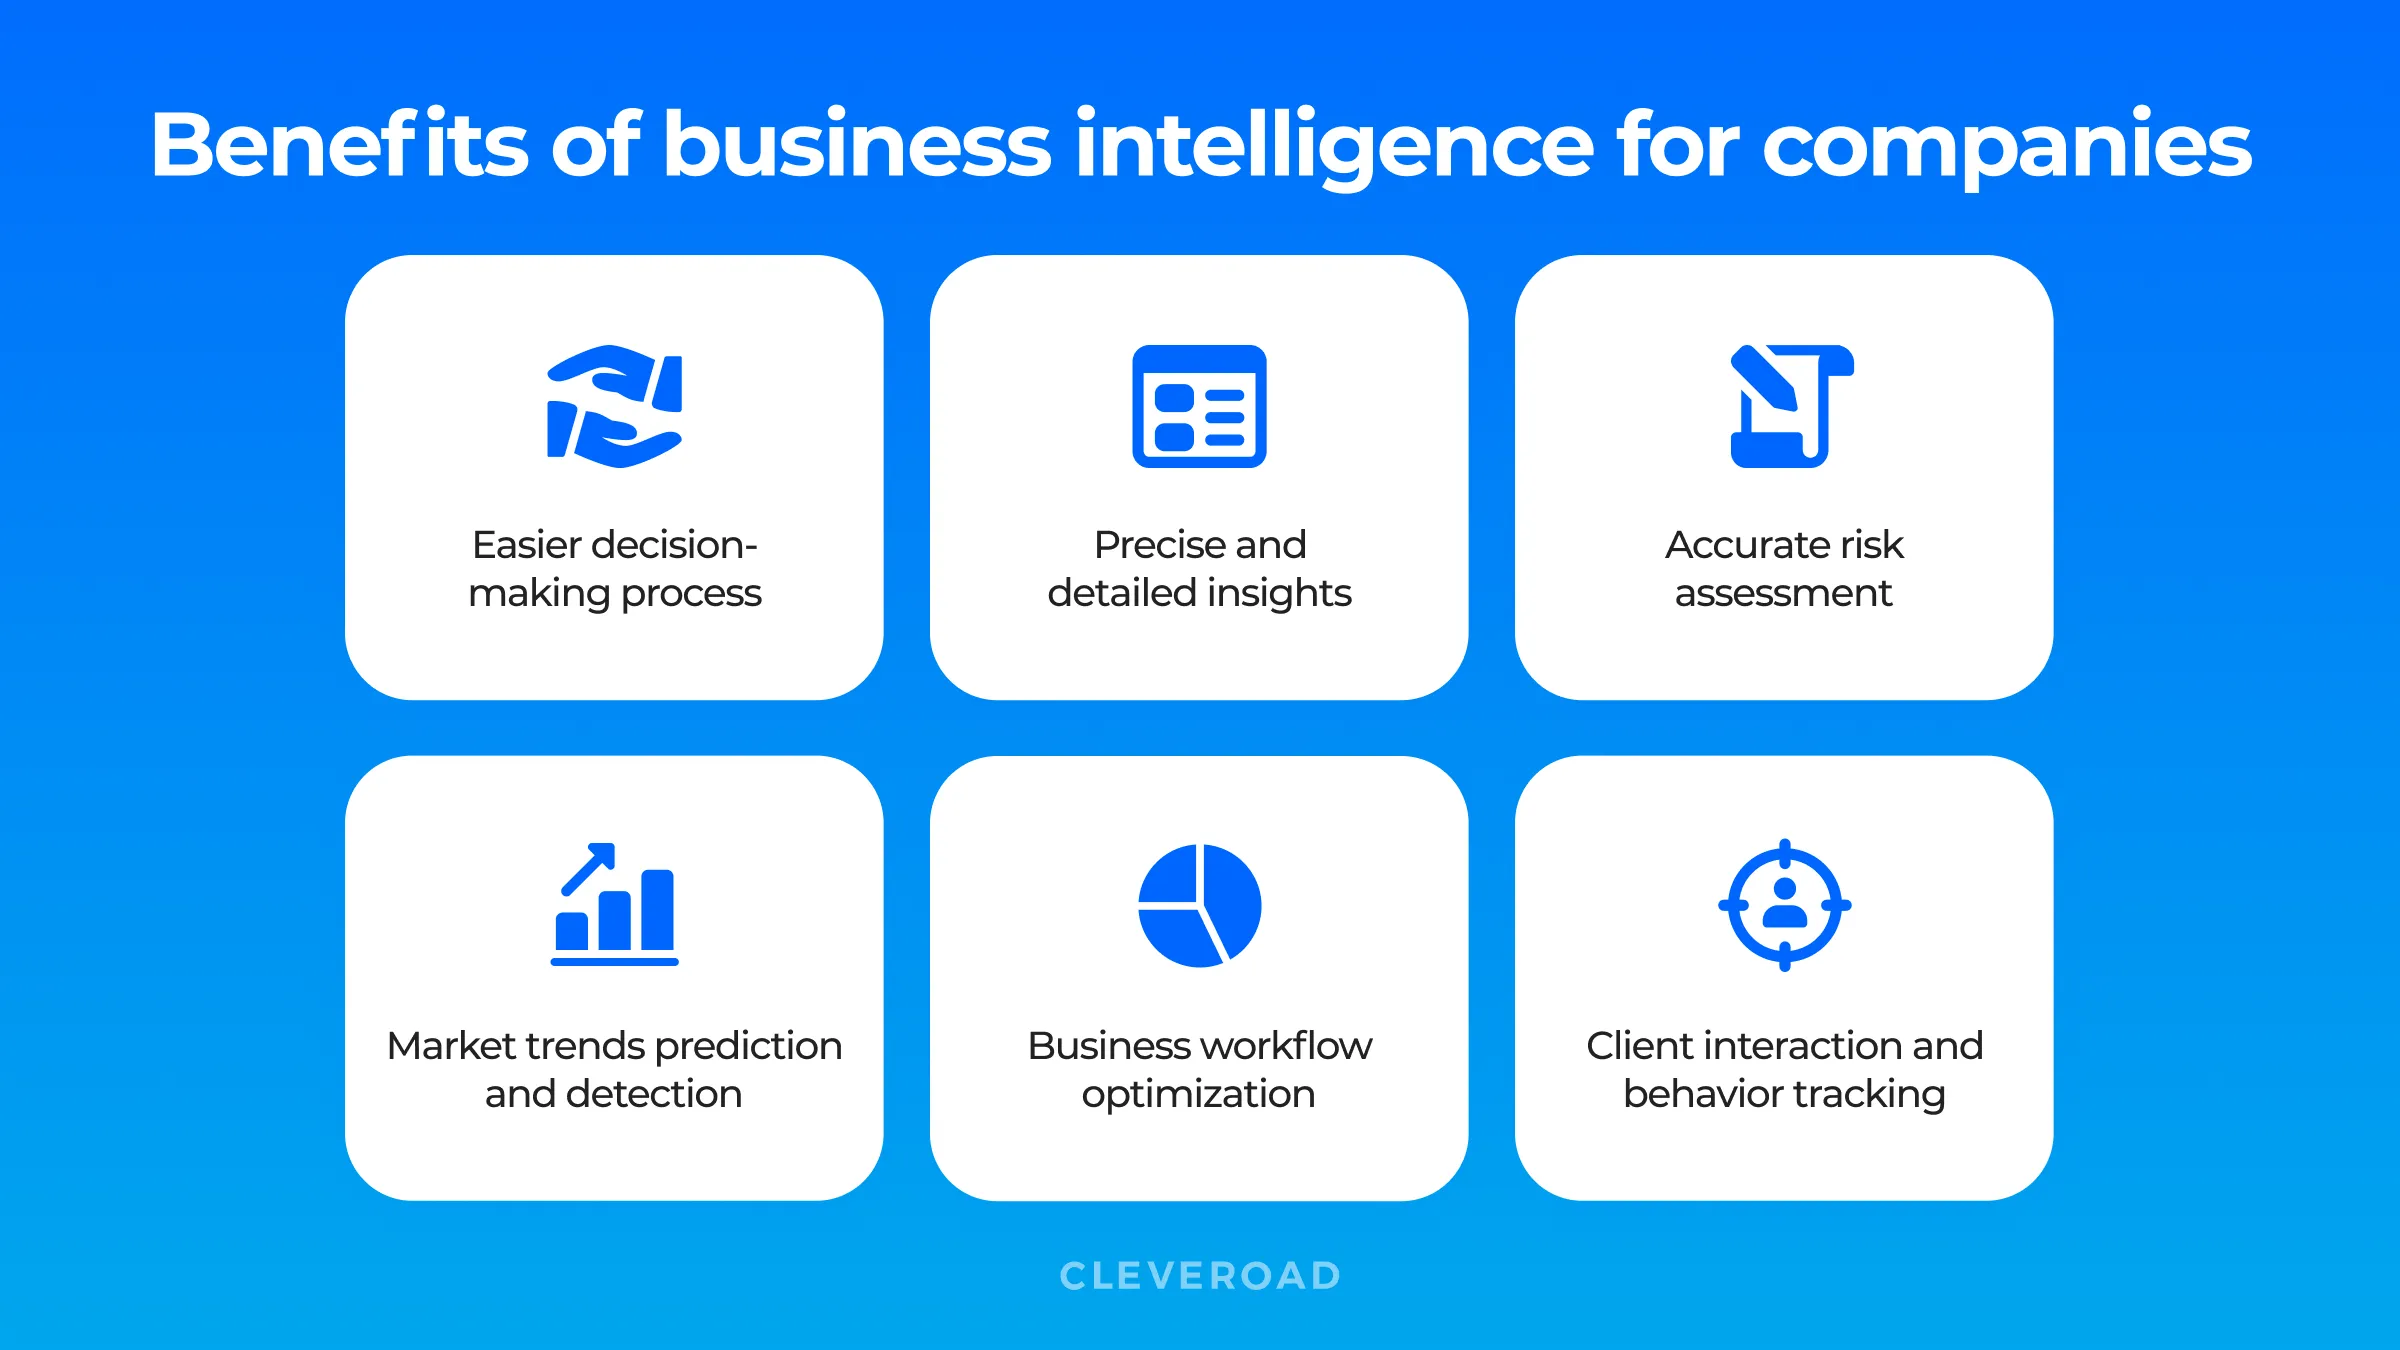 Benefits of business intelligence for companies